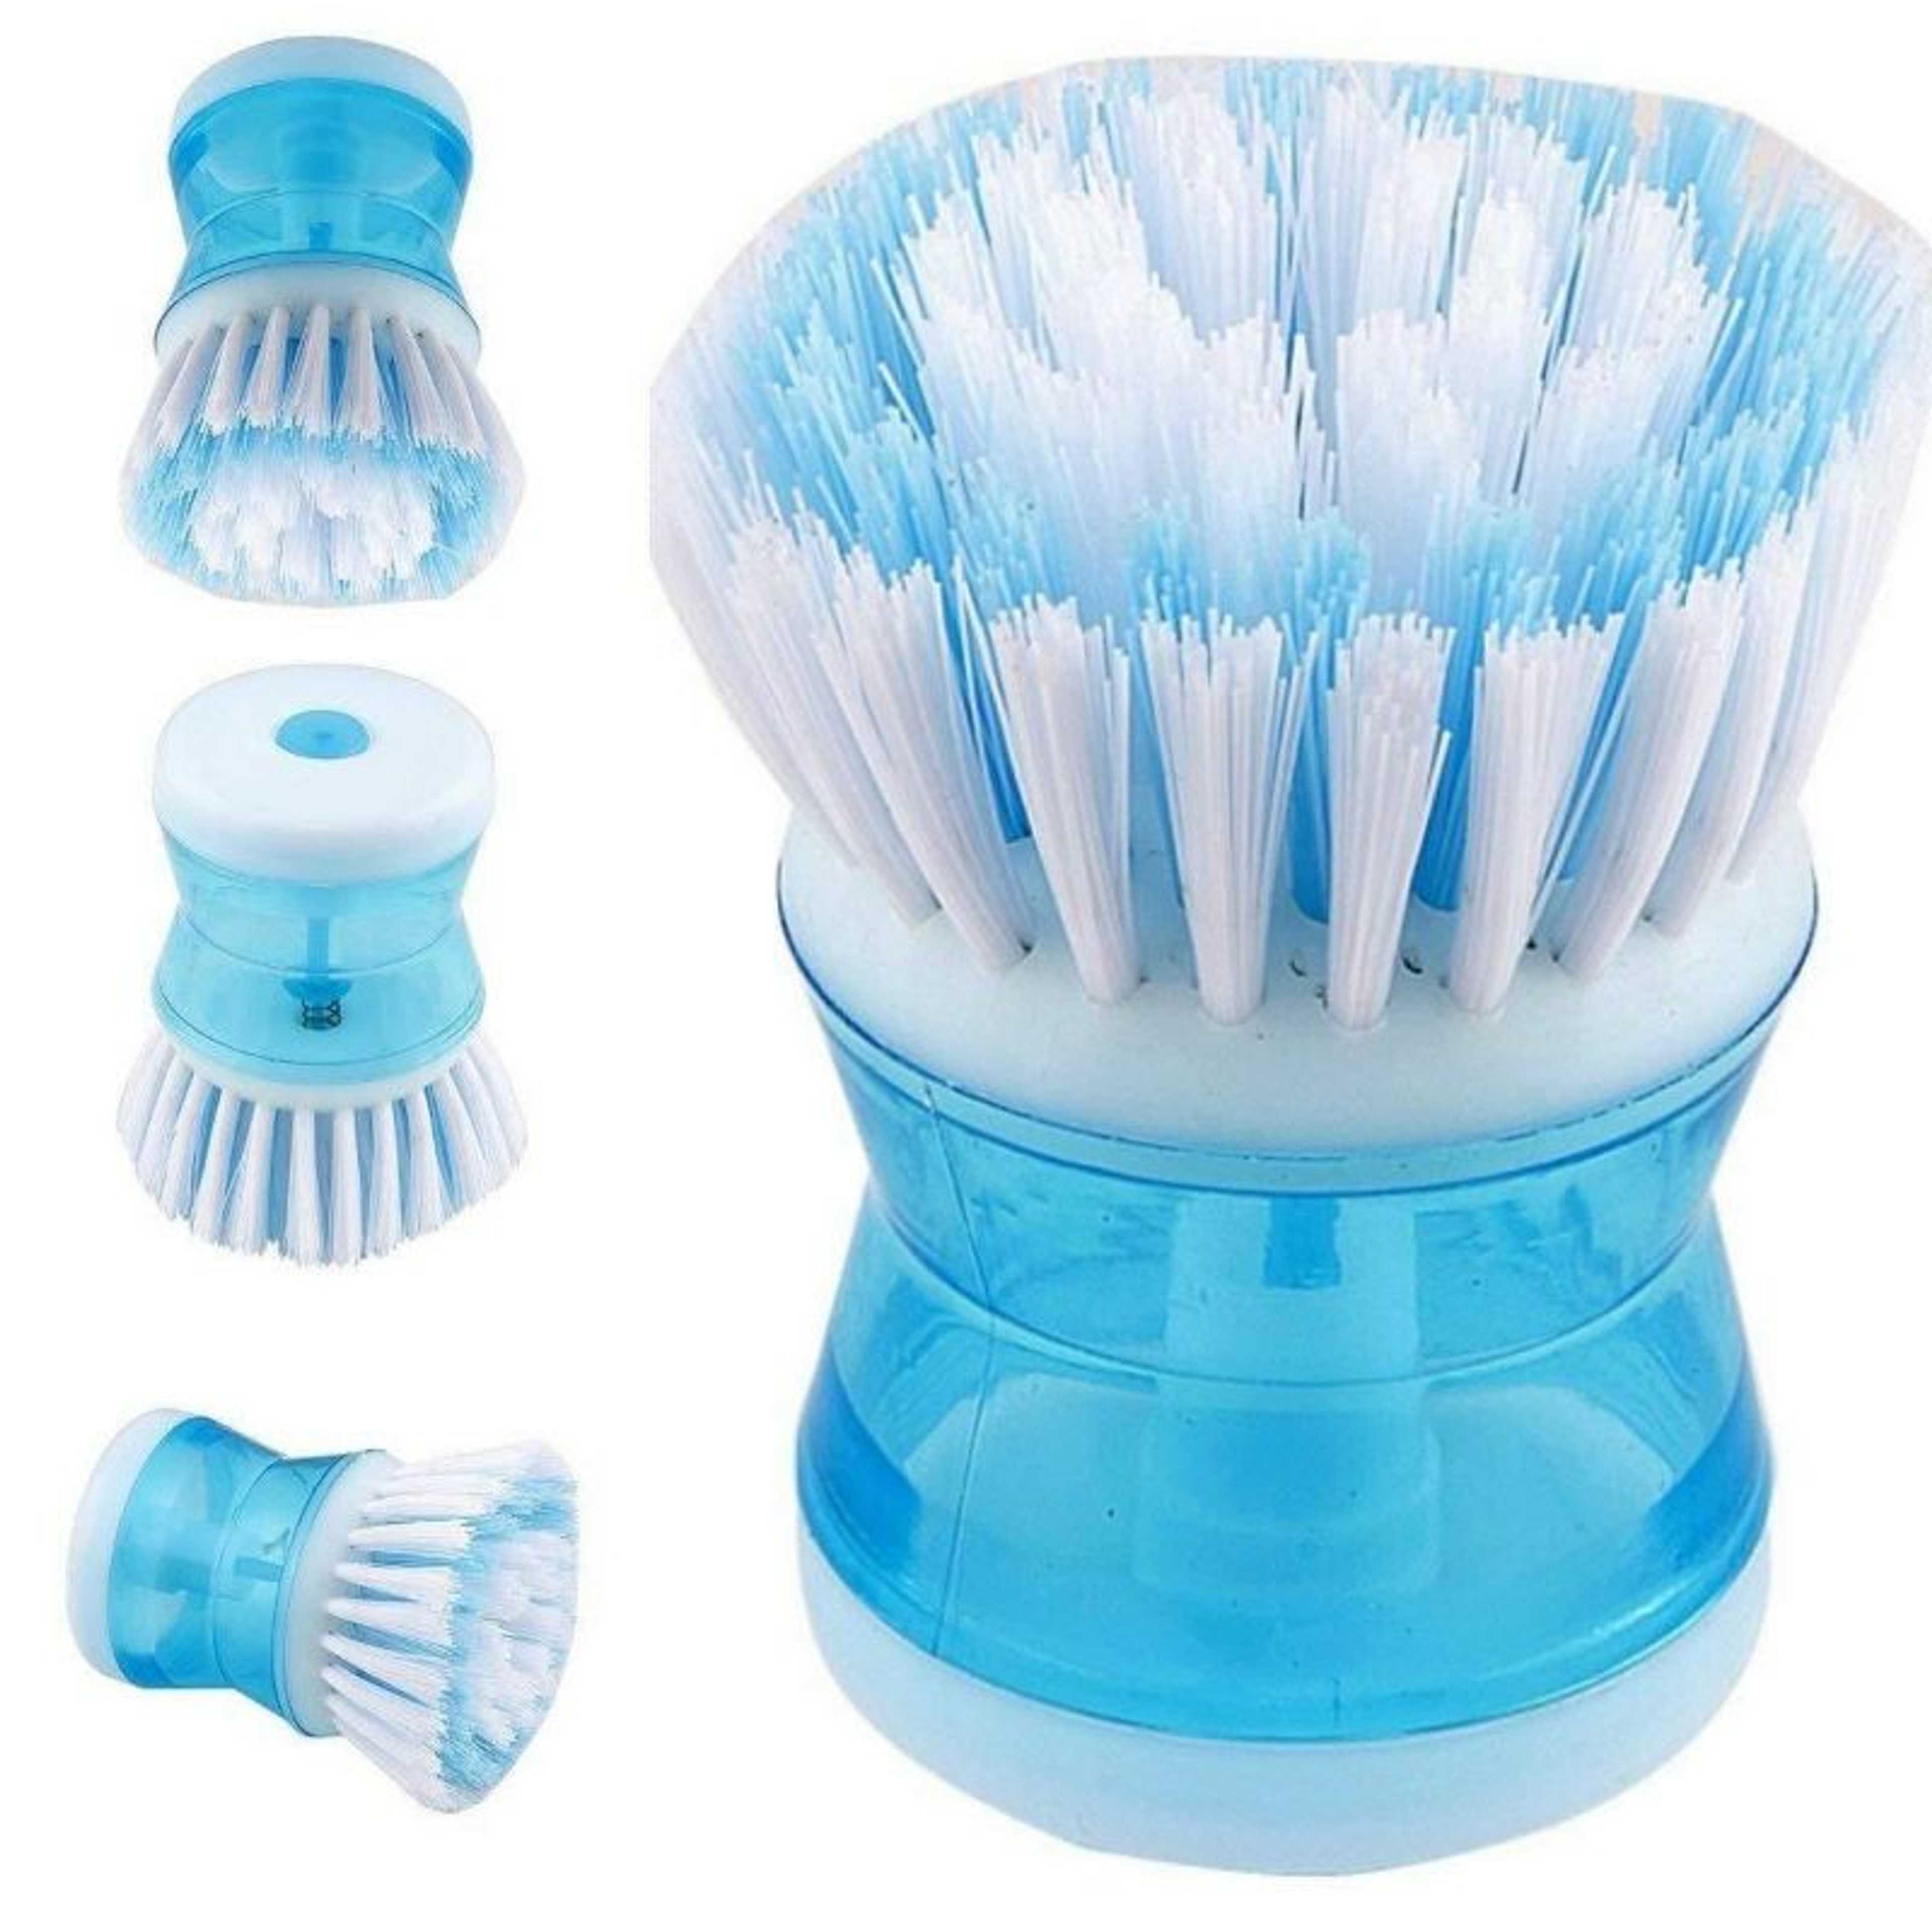 Kitchen Appliances Washing Brush Pan Pan Liquid Soap Dish Home Clean Brushes Accessiories Mix Random Color Deliver